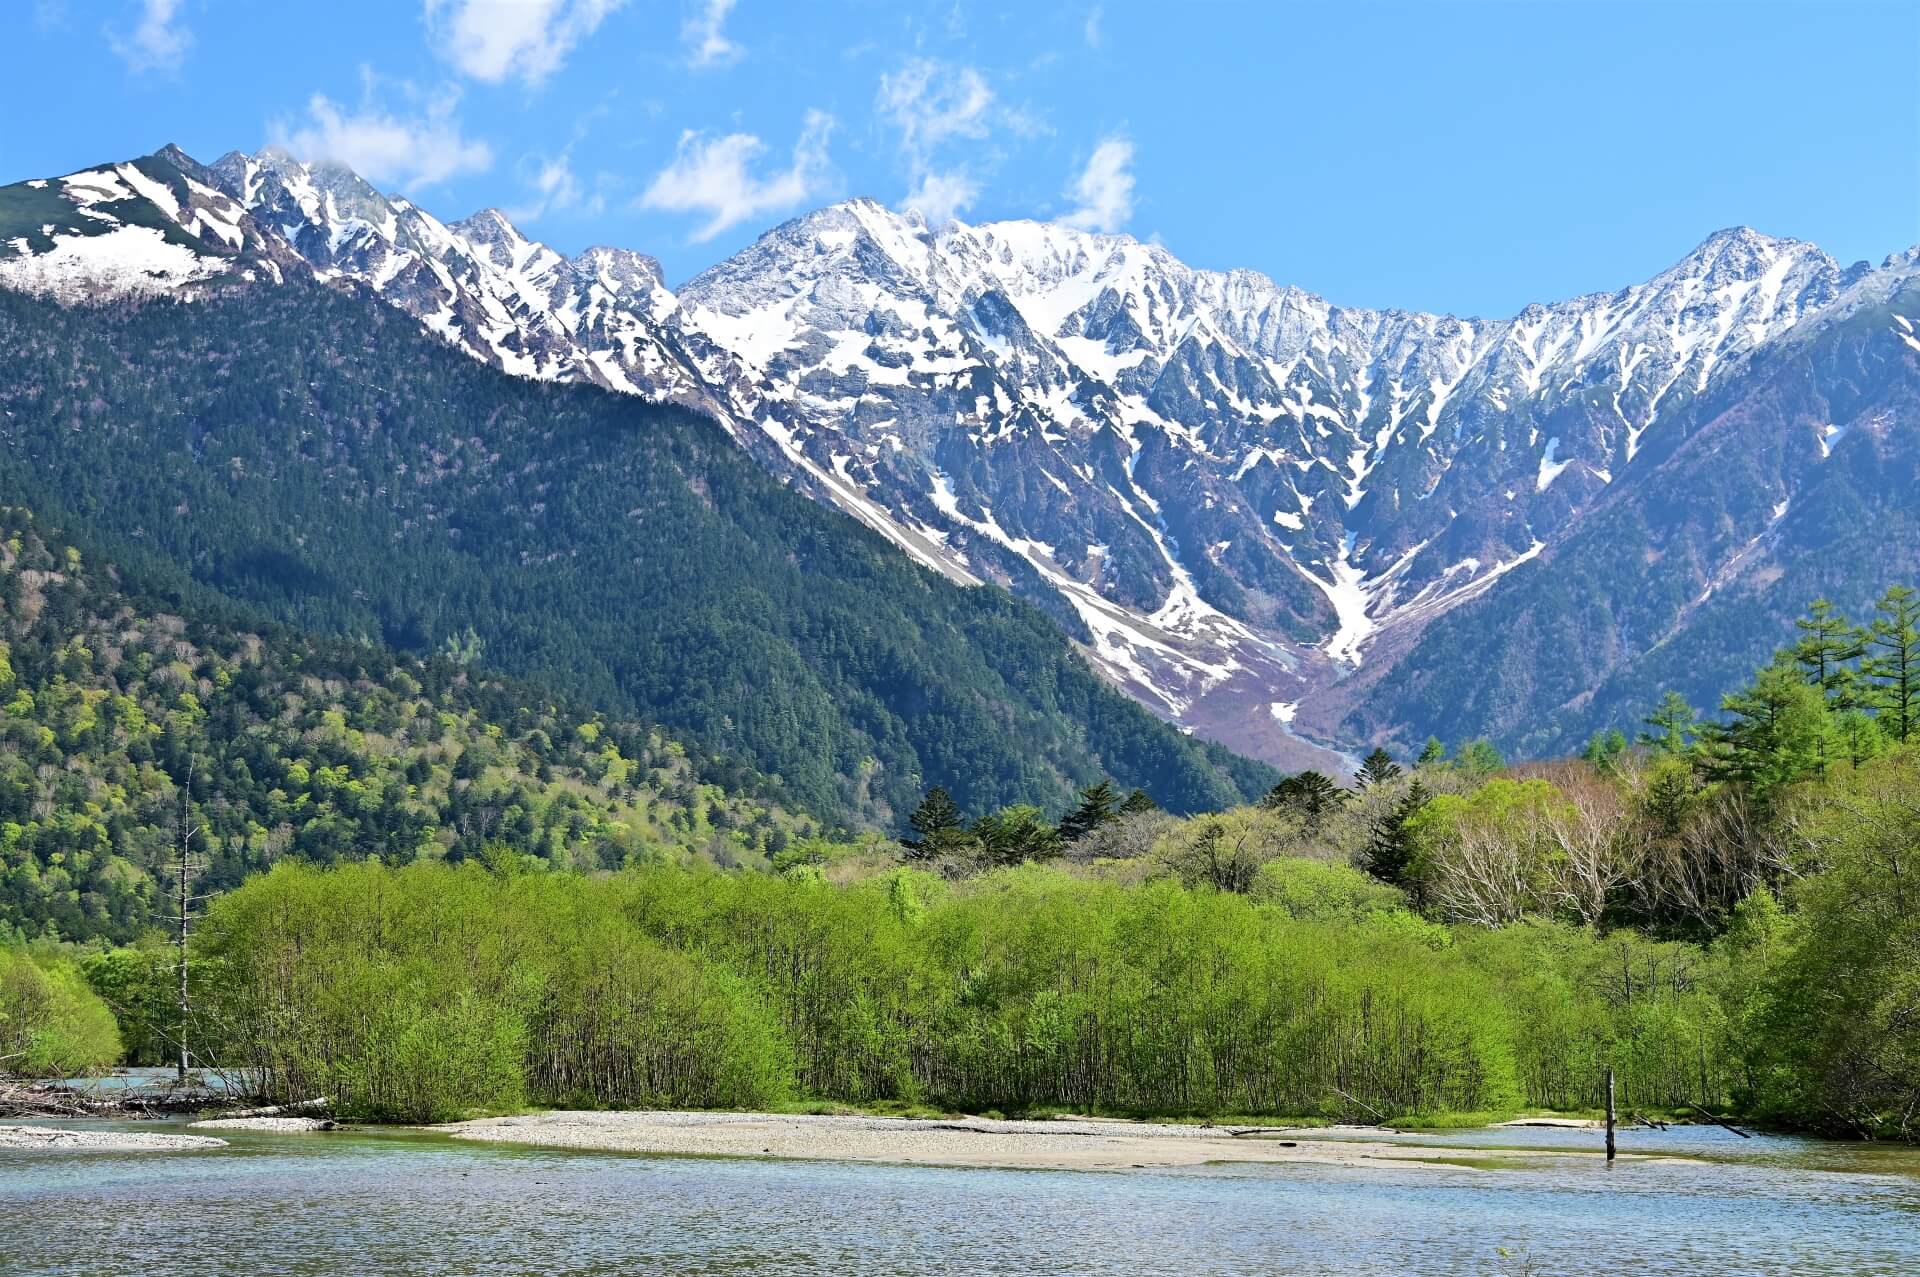 One of Japan’s Most Iconic Alpine Landscapes